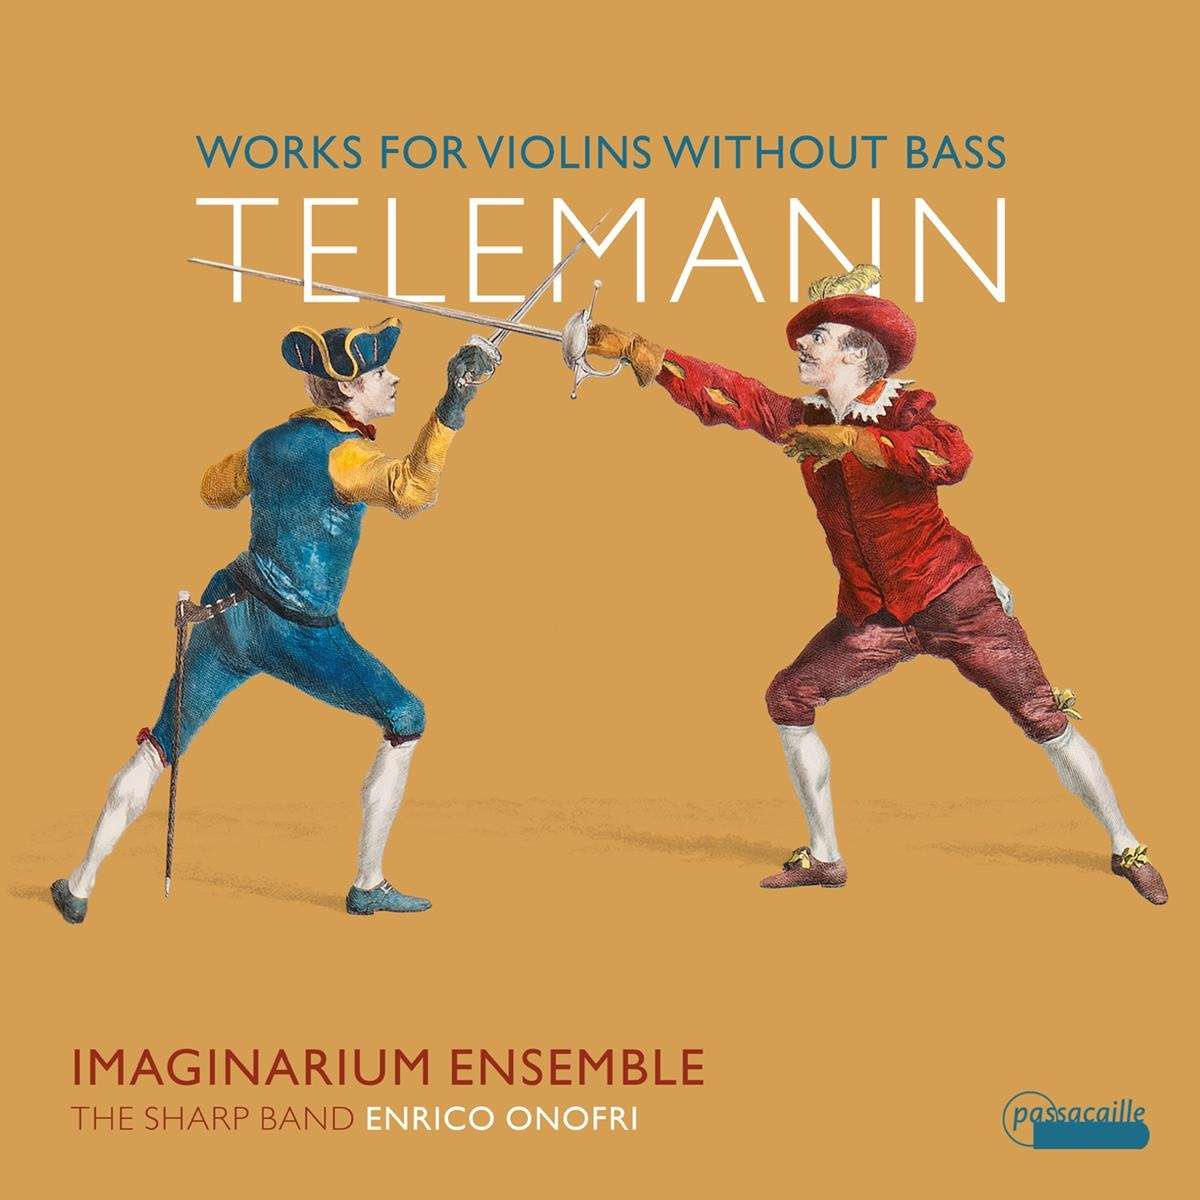 GEORG PHILIPP TELEMANN: WORKS FOR VIOLINS WITHOUT BASS